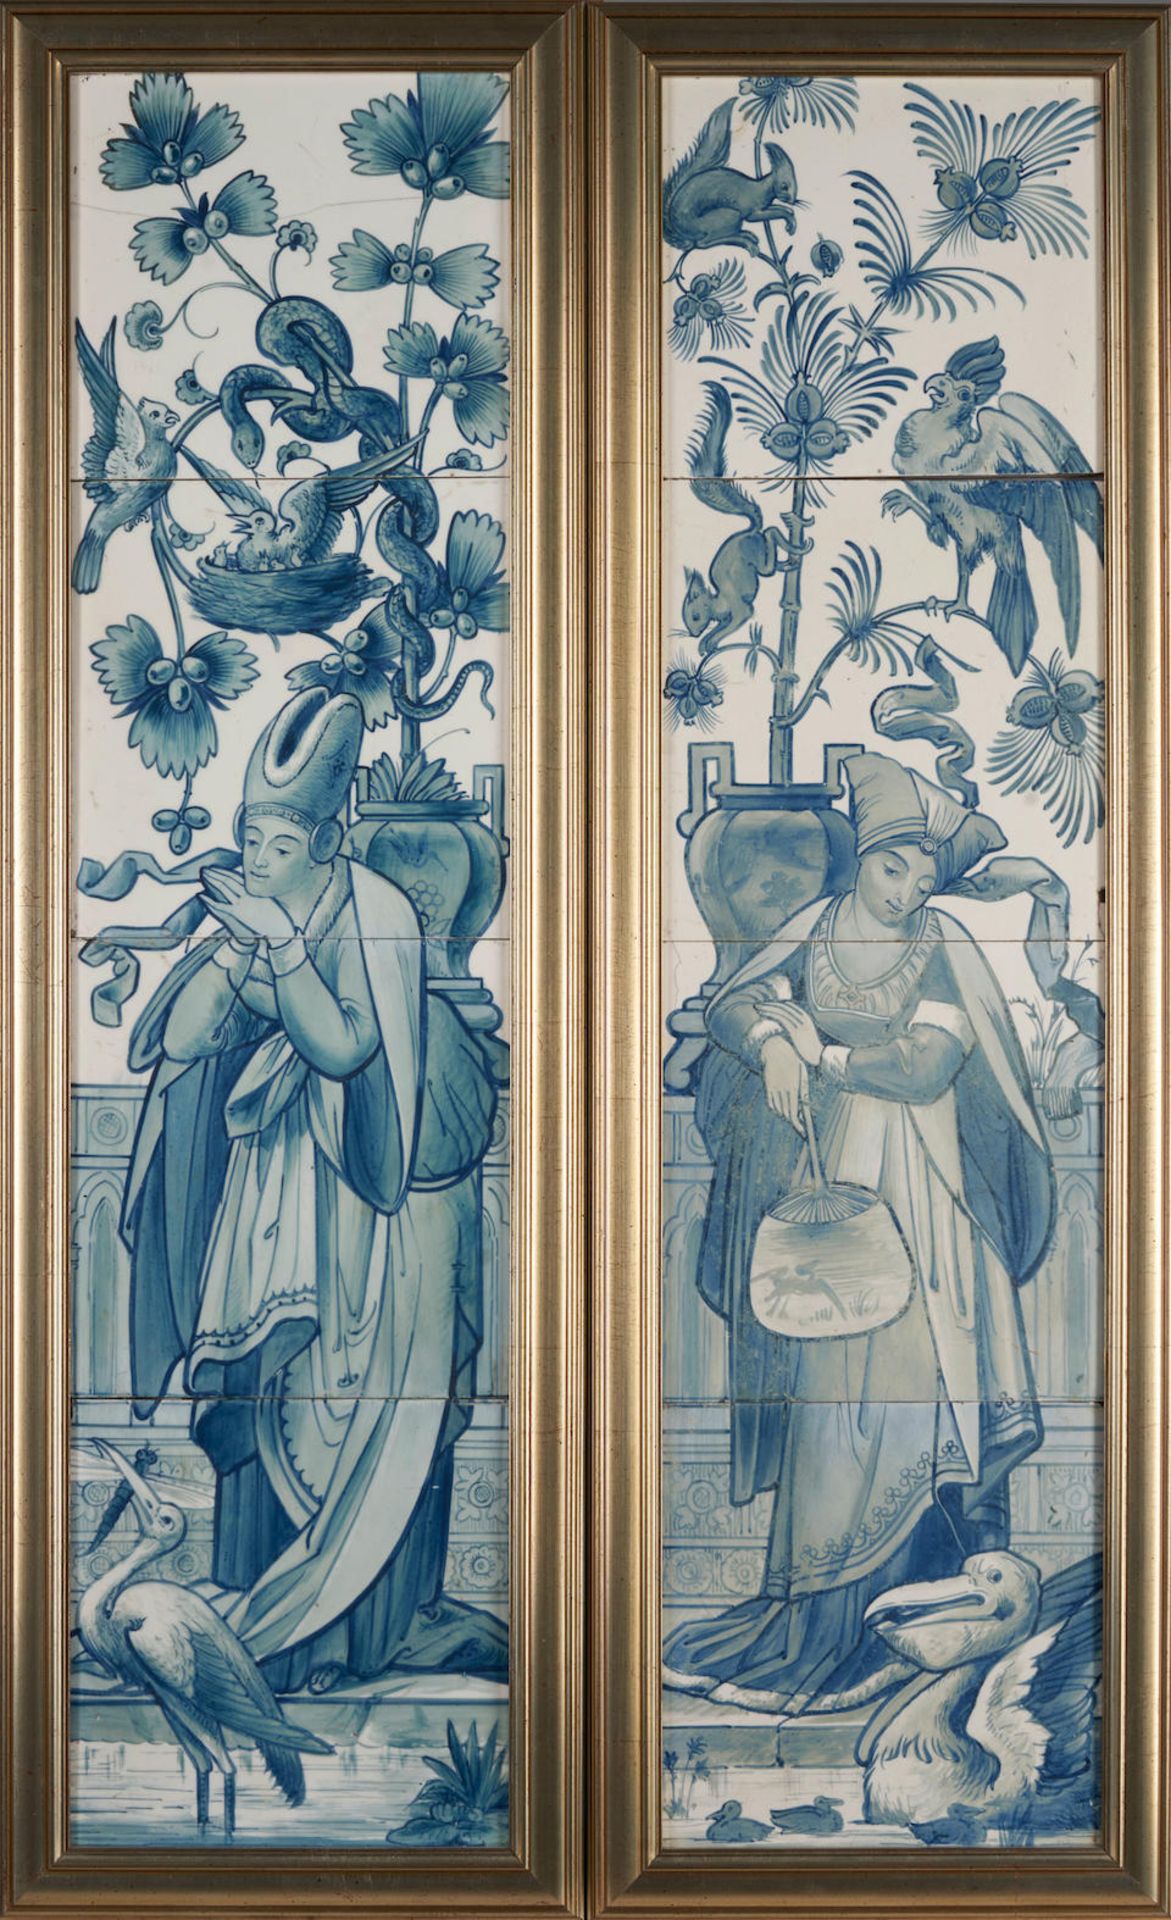 PAIR OF HAND-PAINTED TILE PANELS DEPICTING FIGURES IN AN EXOTIC GARDEN, probably England, c. 190...